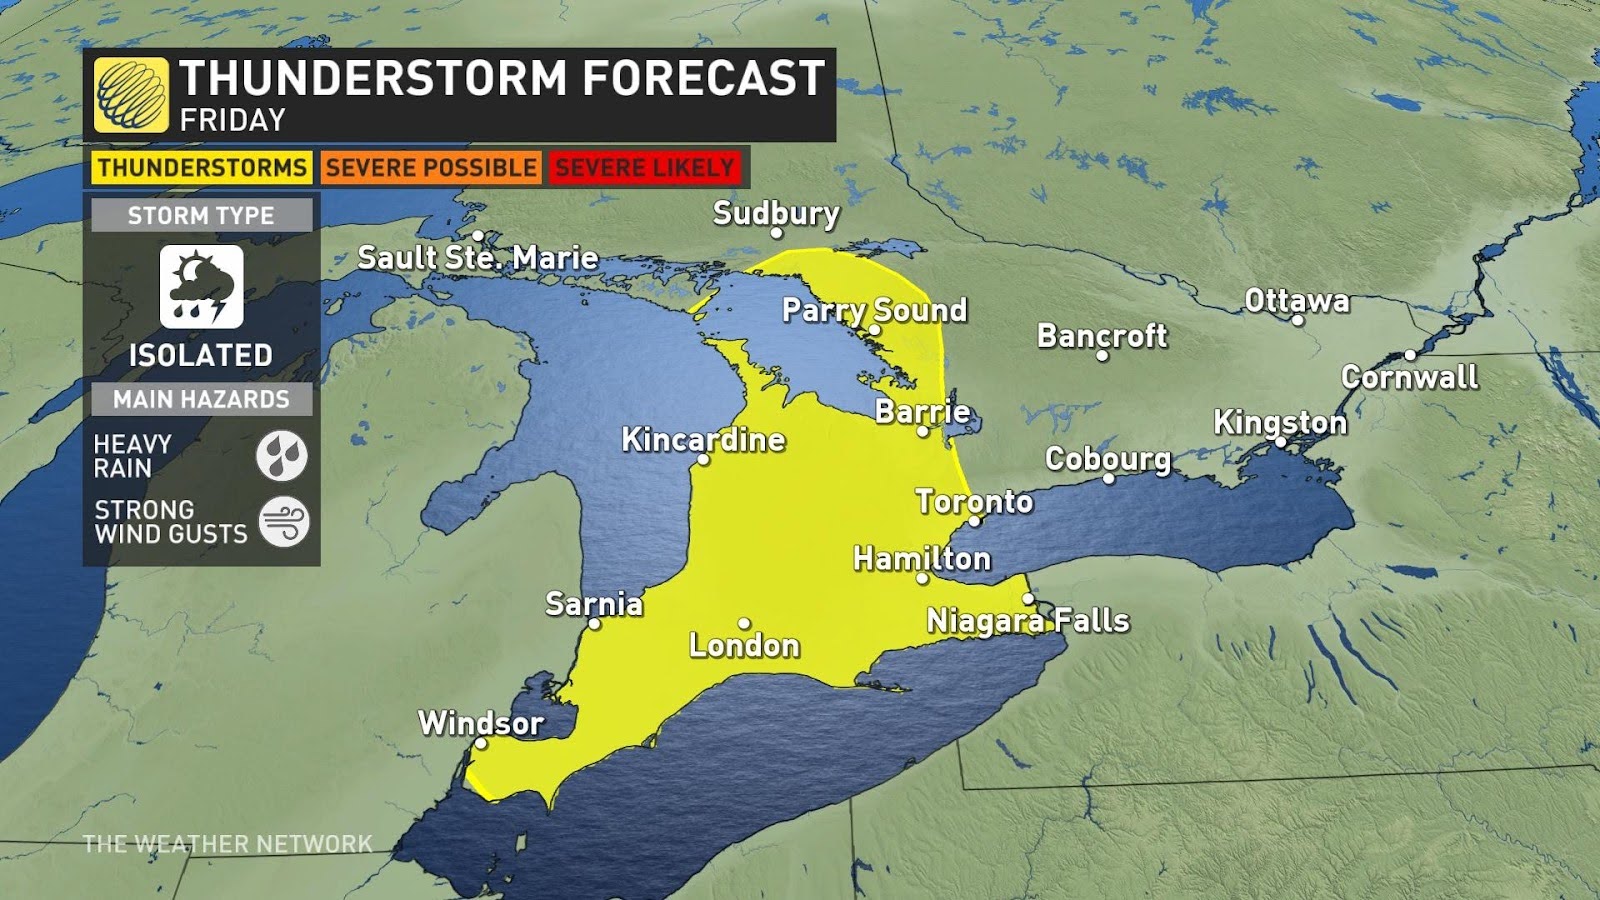 showers, thunderstorm risk rain on southern ontario's weekend parade